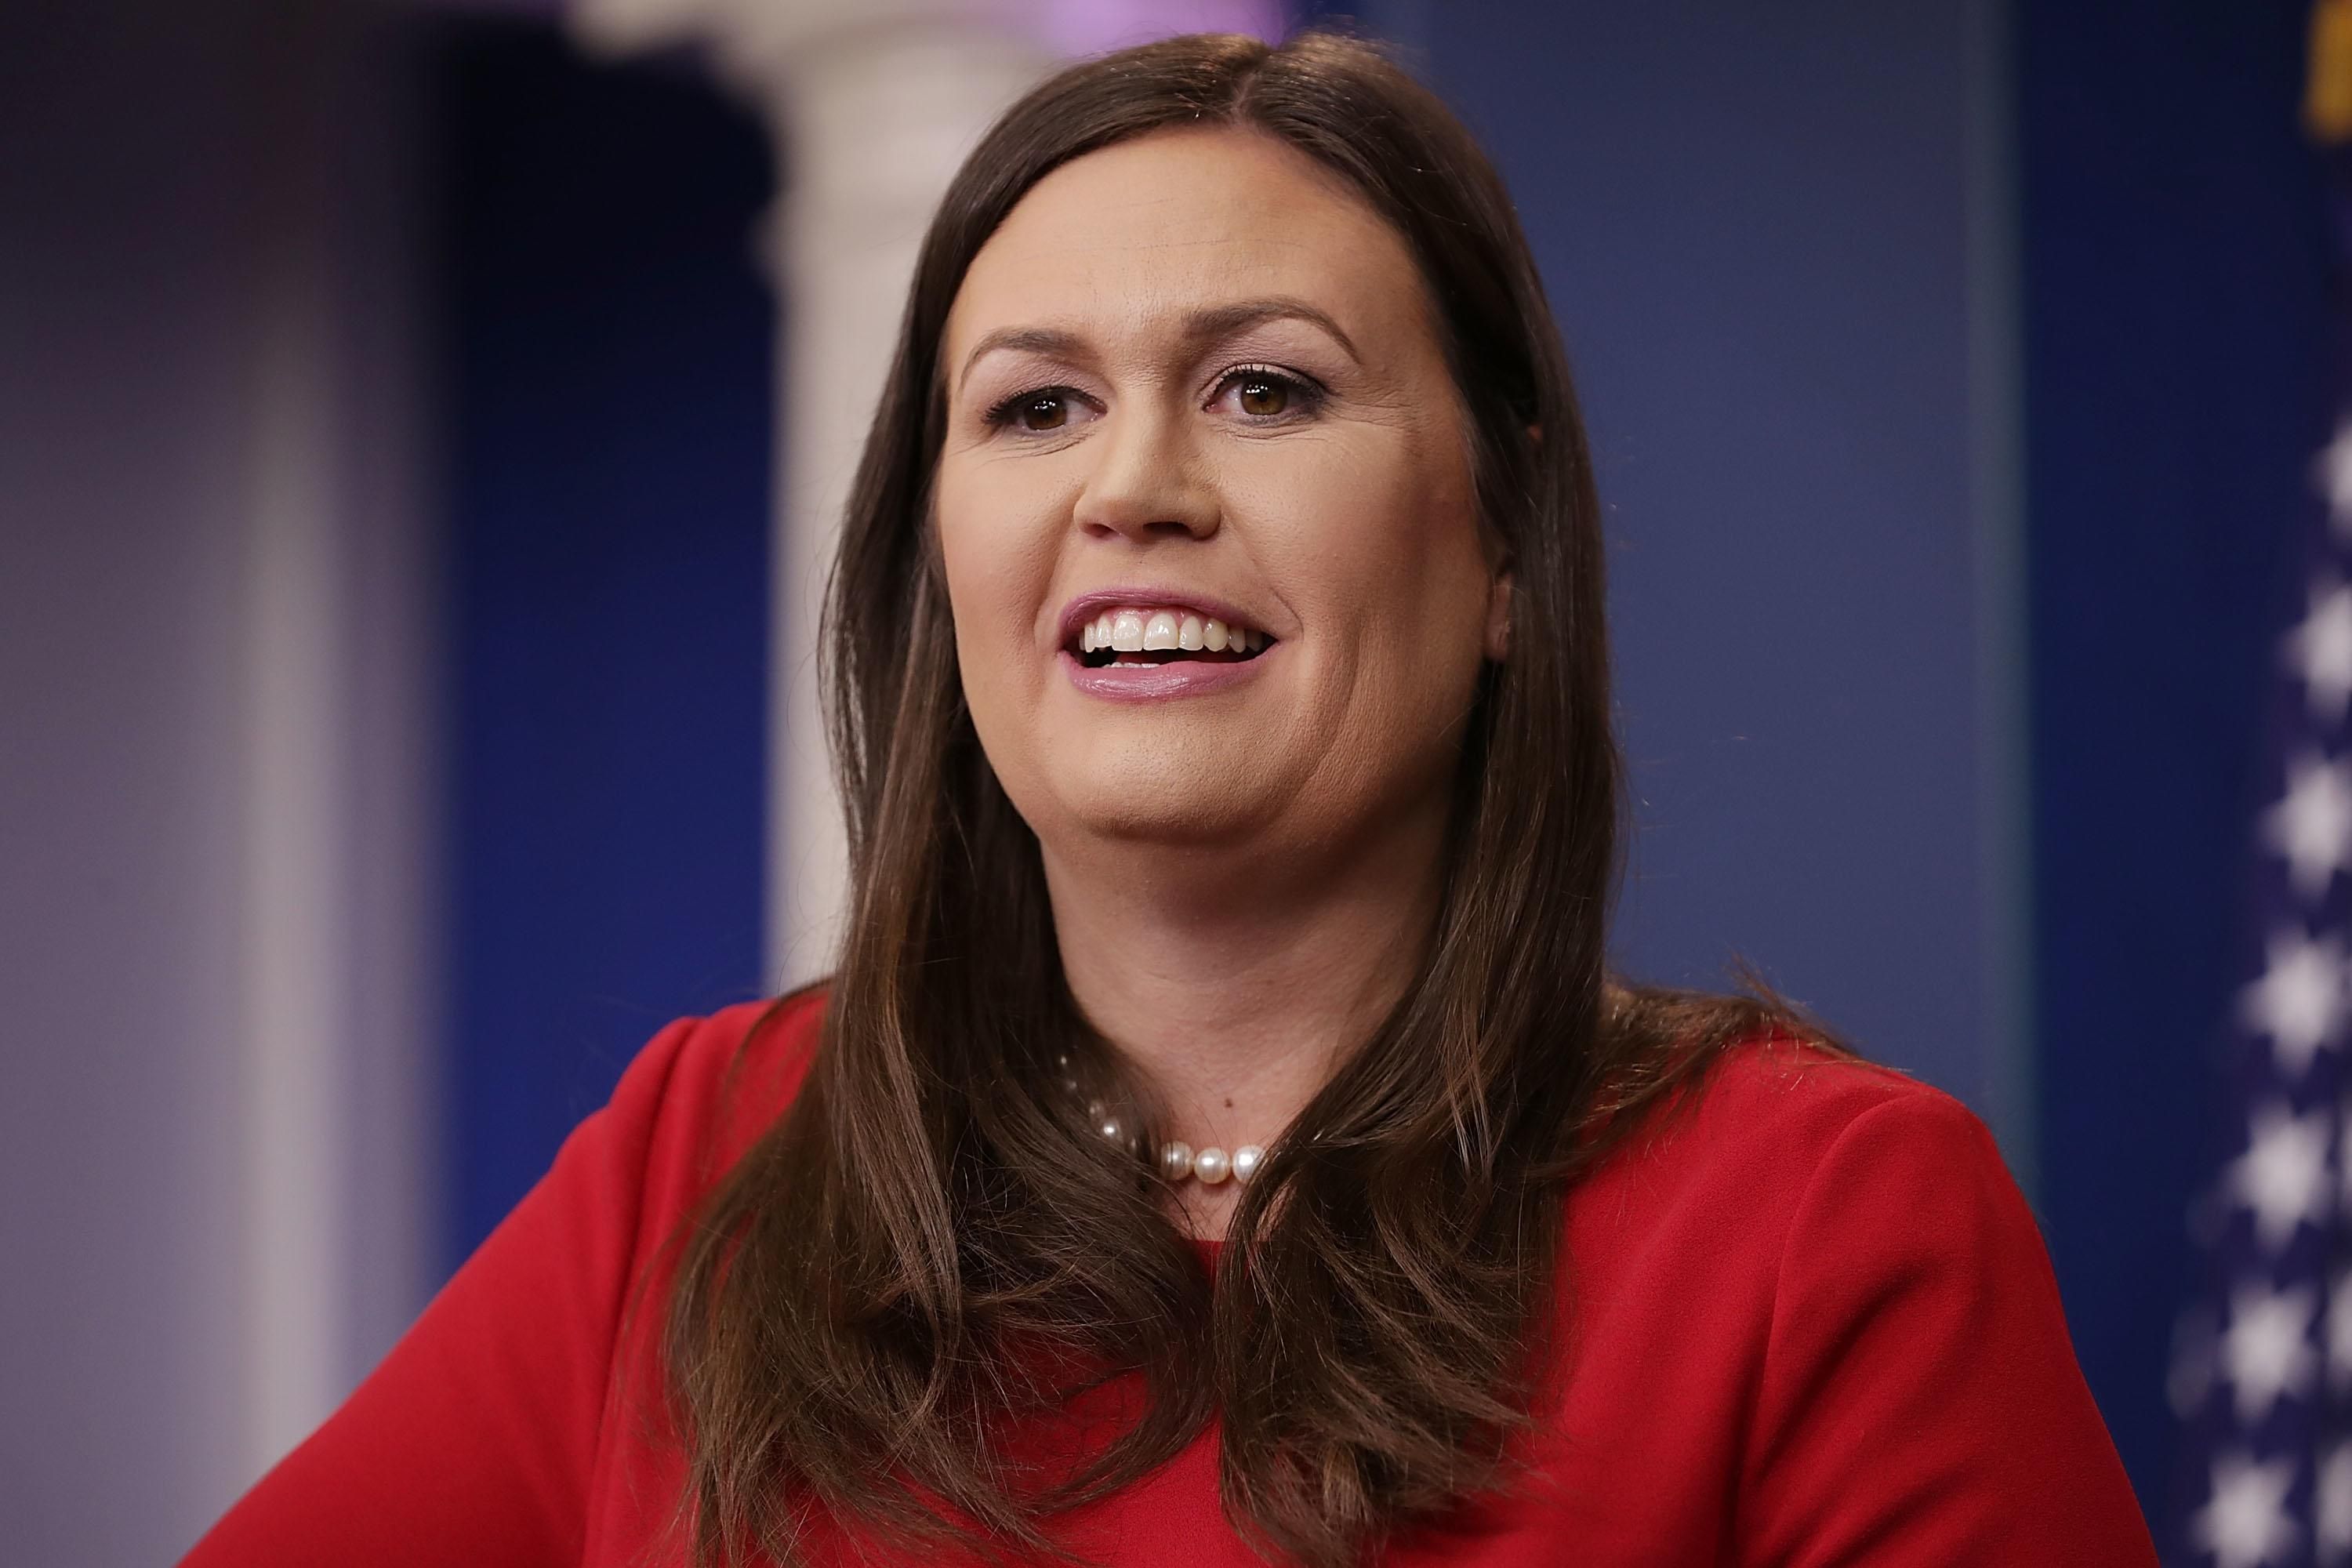 Sarah Huckabee Sanders offers a powerful response to comedian's attack...